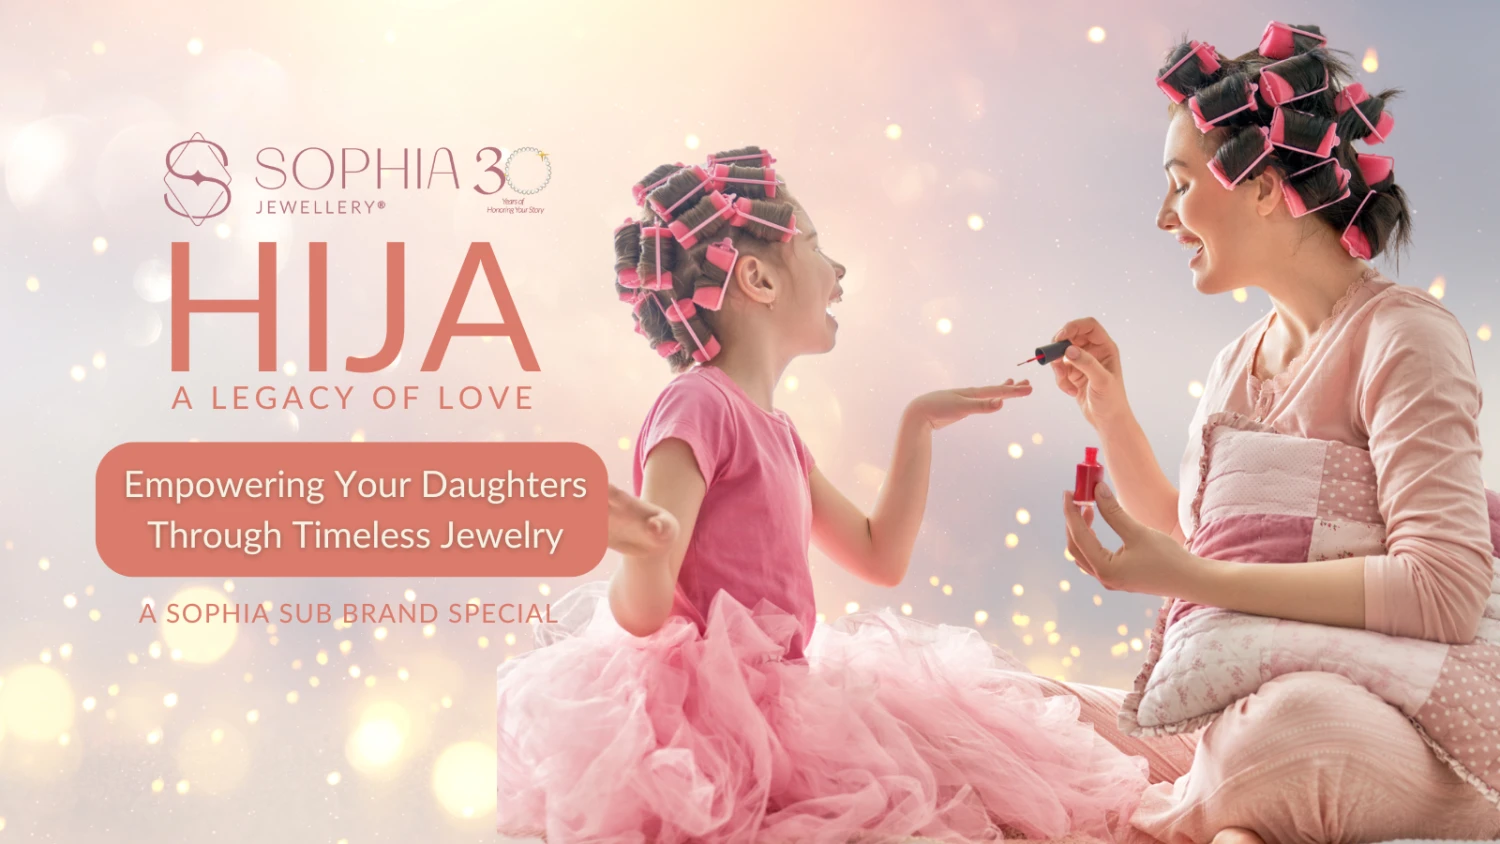 Hija: A Legacy of Love, Empowering Your Daughters Through Timeless Jewelry